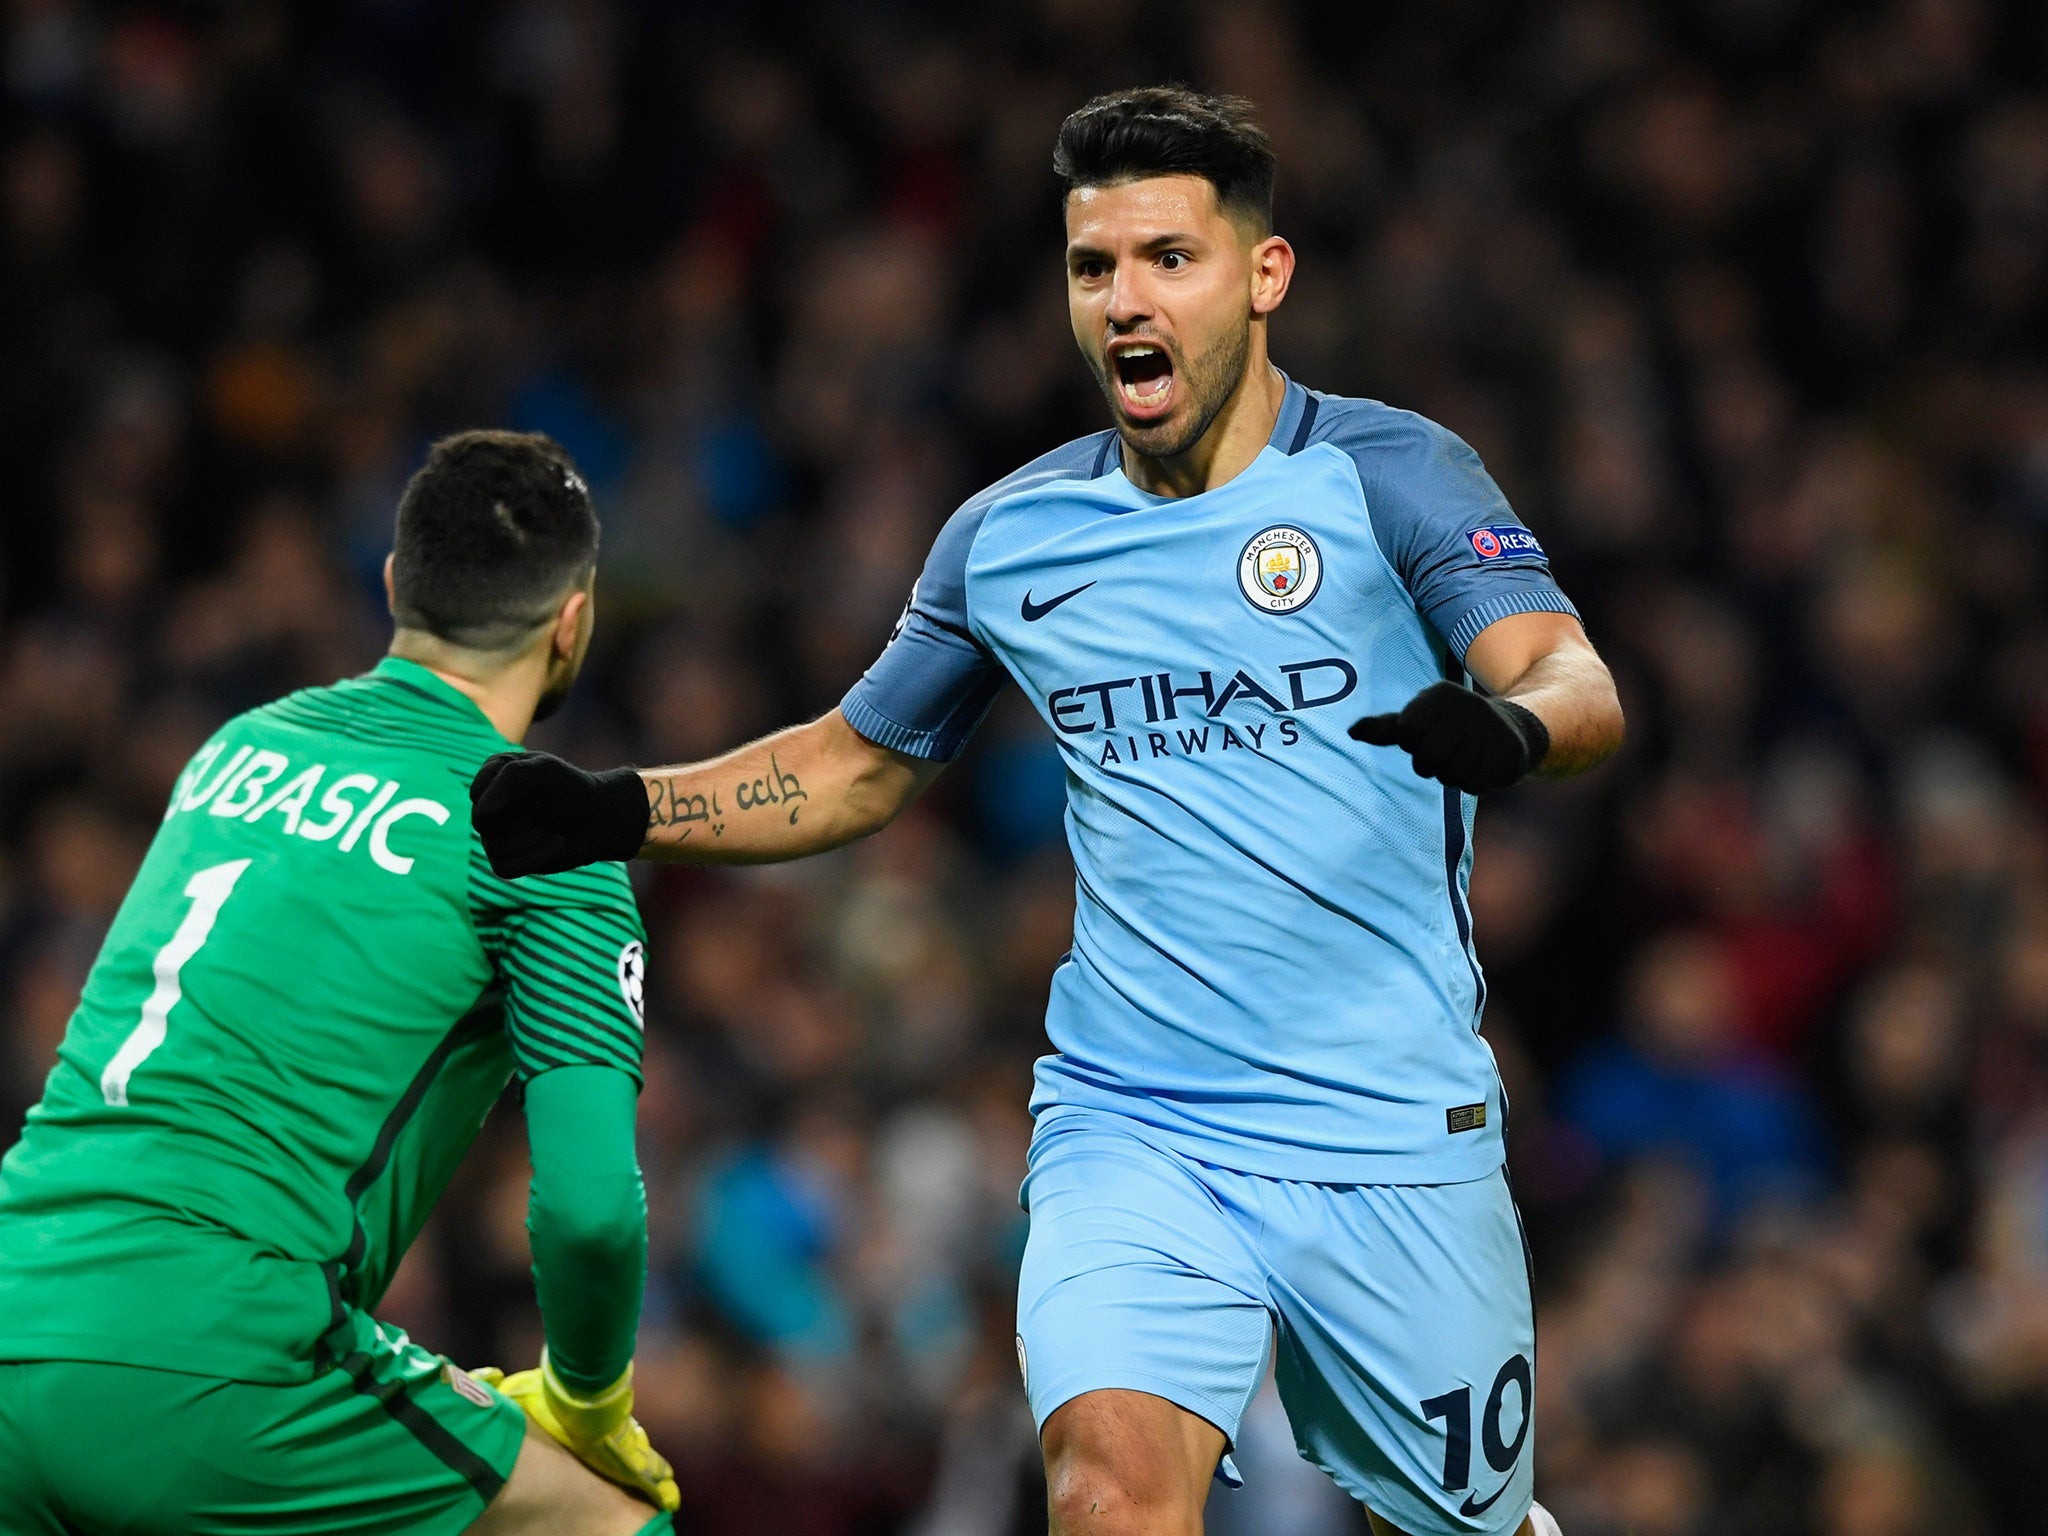 Sergio Aguero put City on terms with a fabulous volley